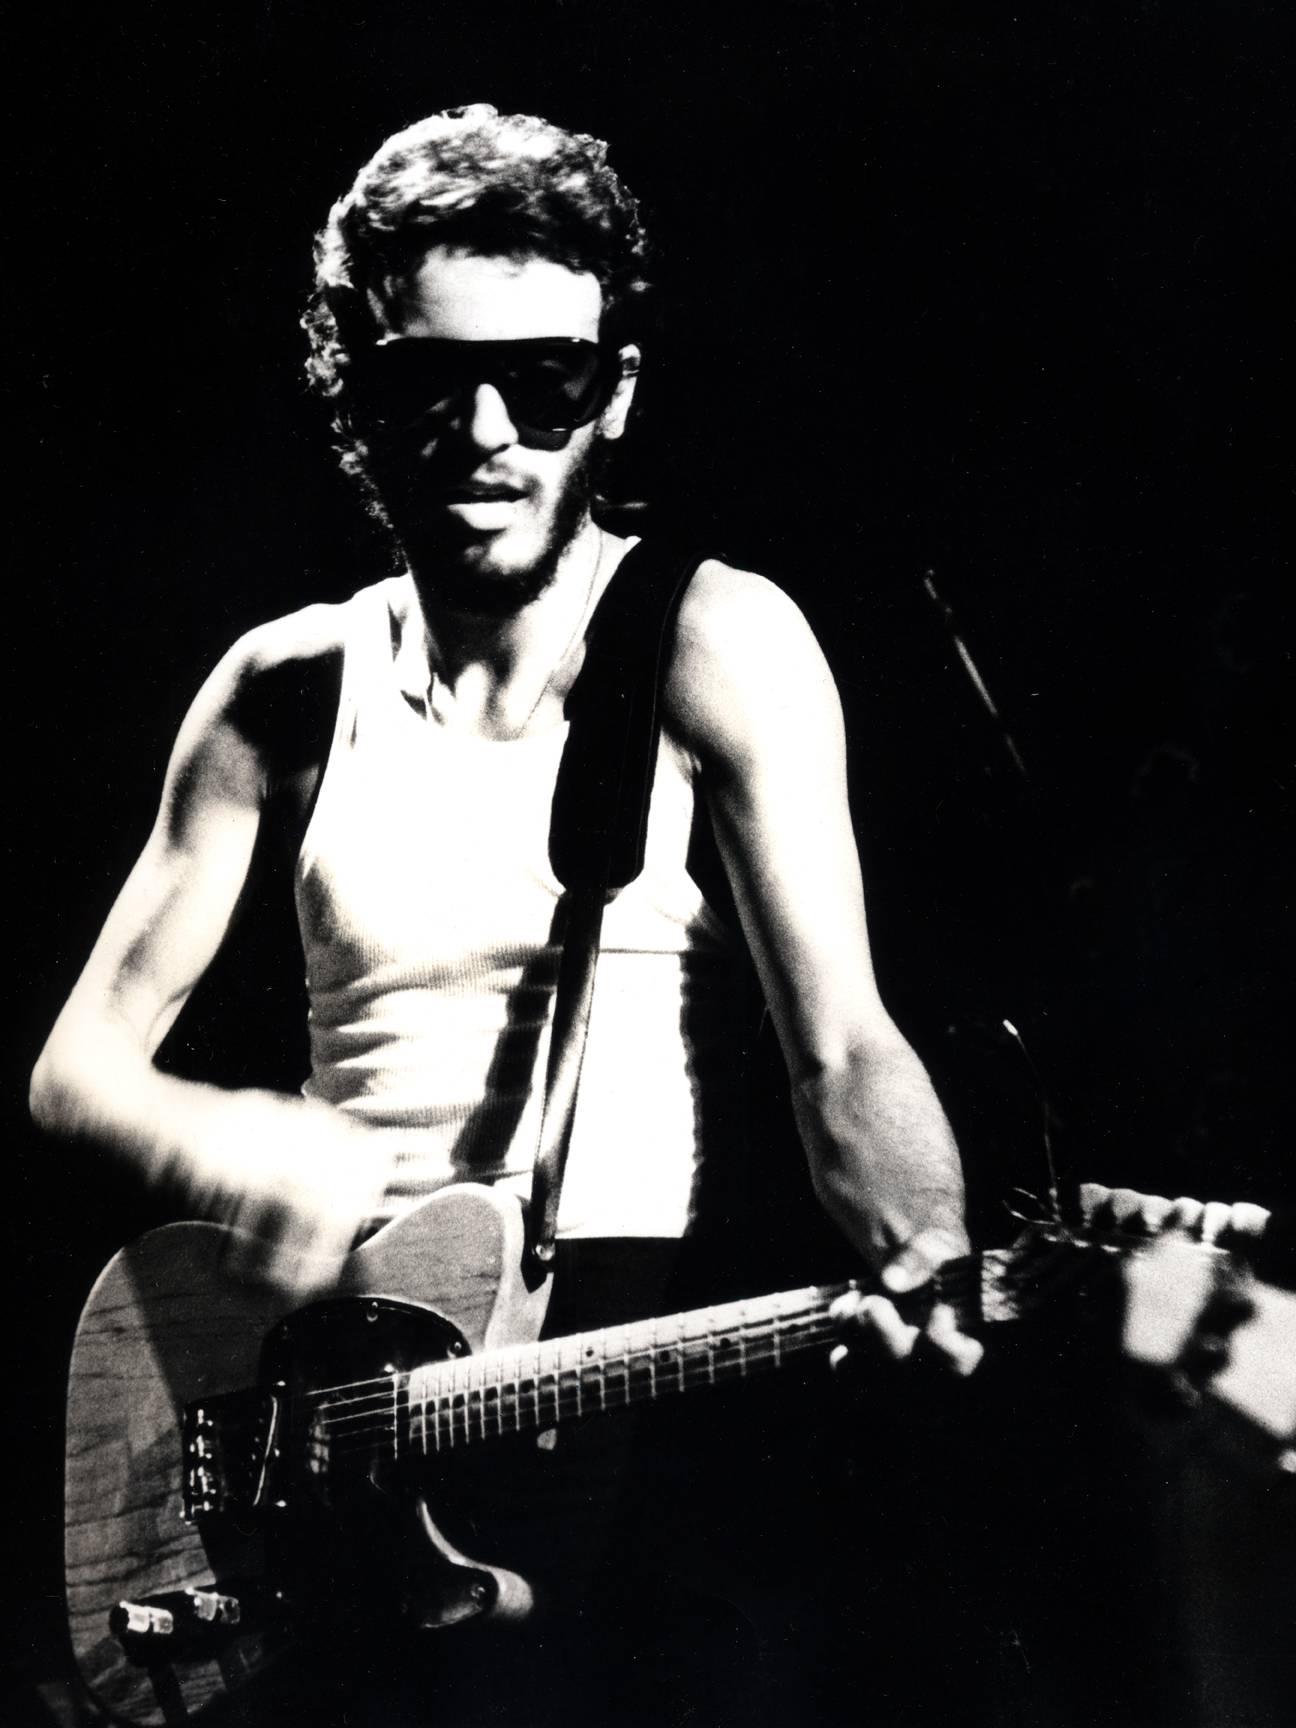 Bruce Springsteen photograph (the Bottom Line NYC 1975)